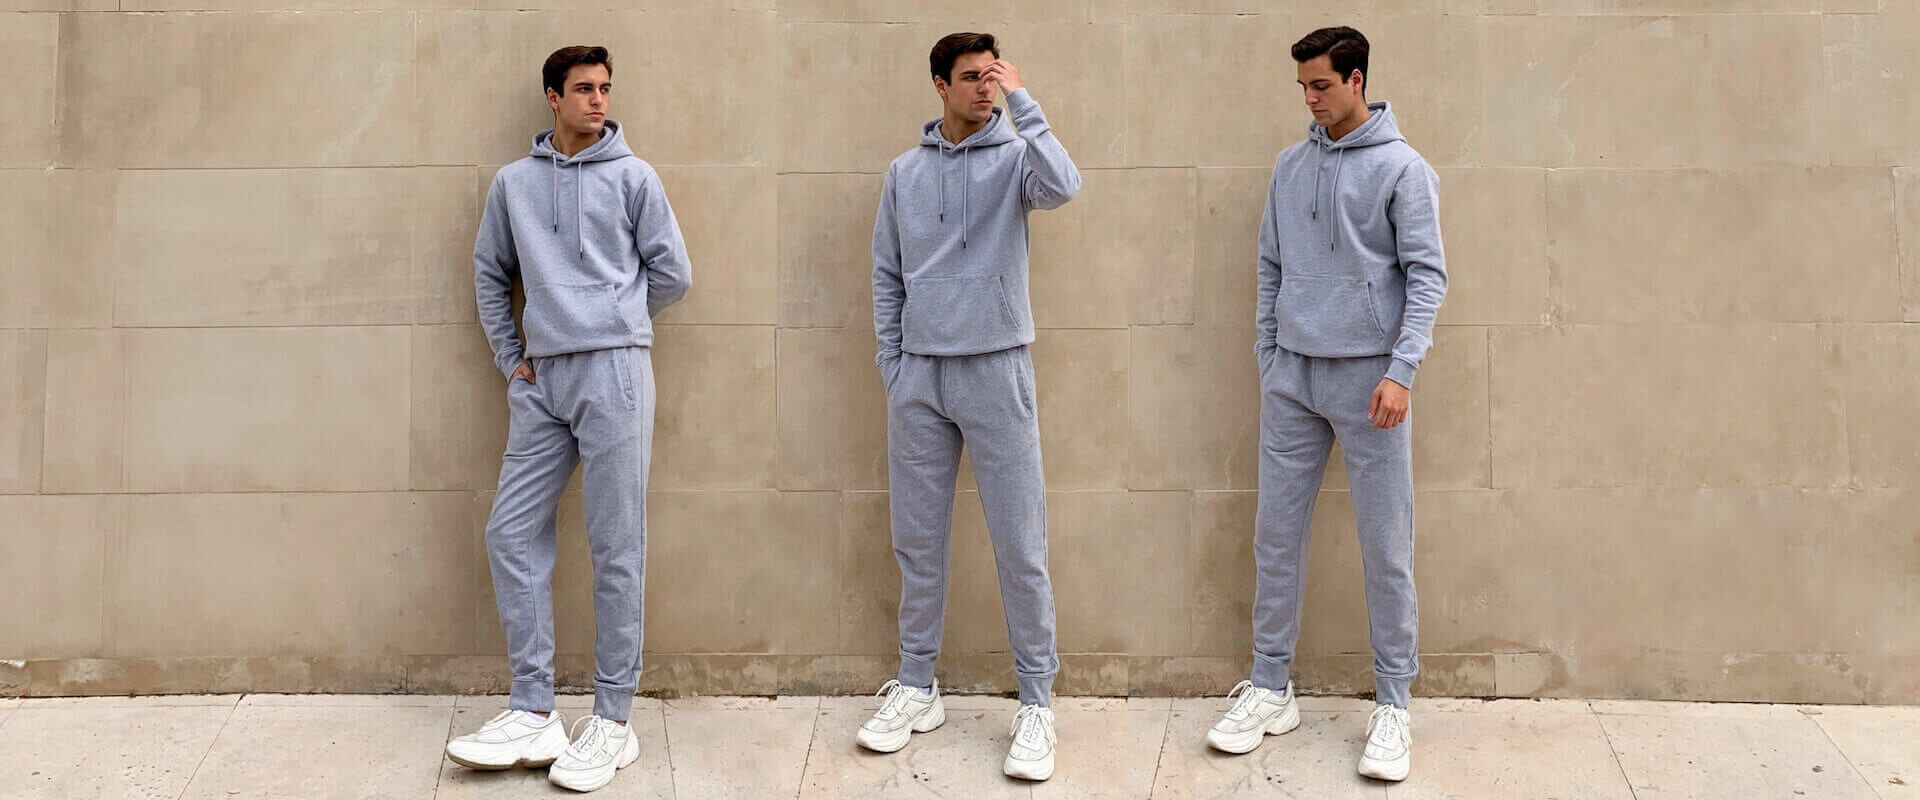 White Sweatpants with Grey T-shirt Relaxed Outfits For Men (2 ideas &  outfits)